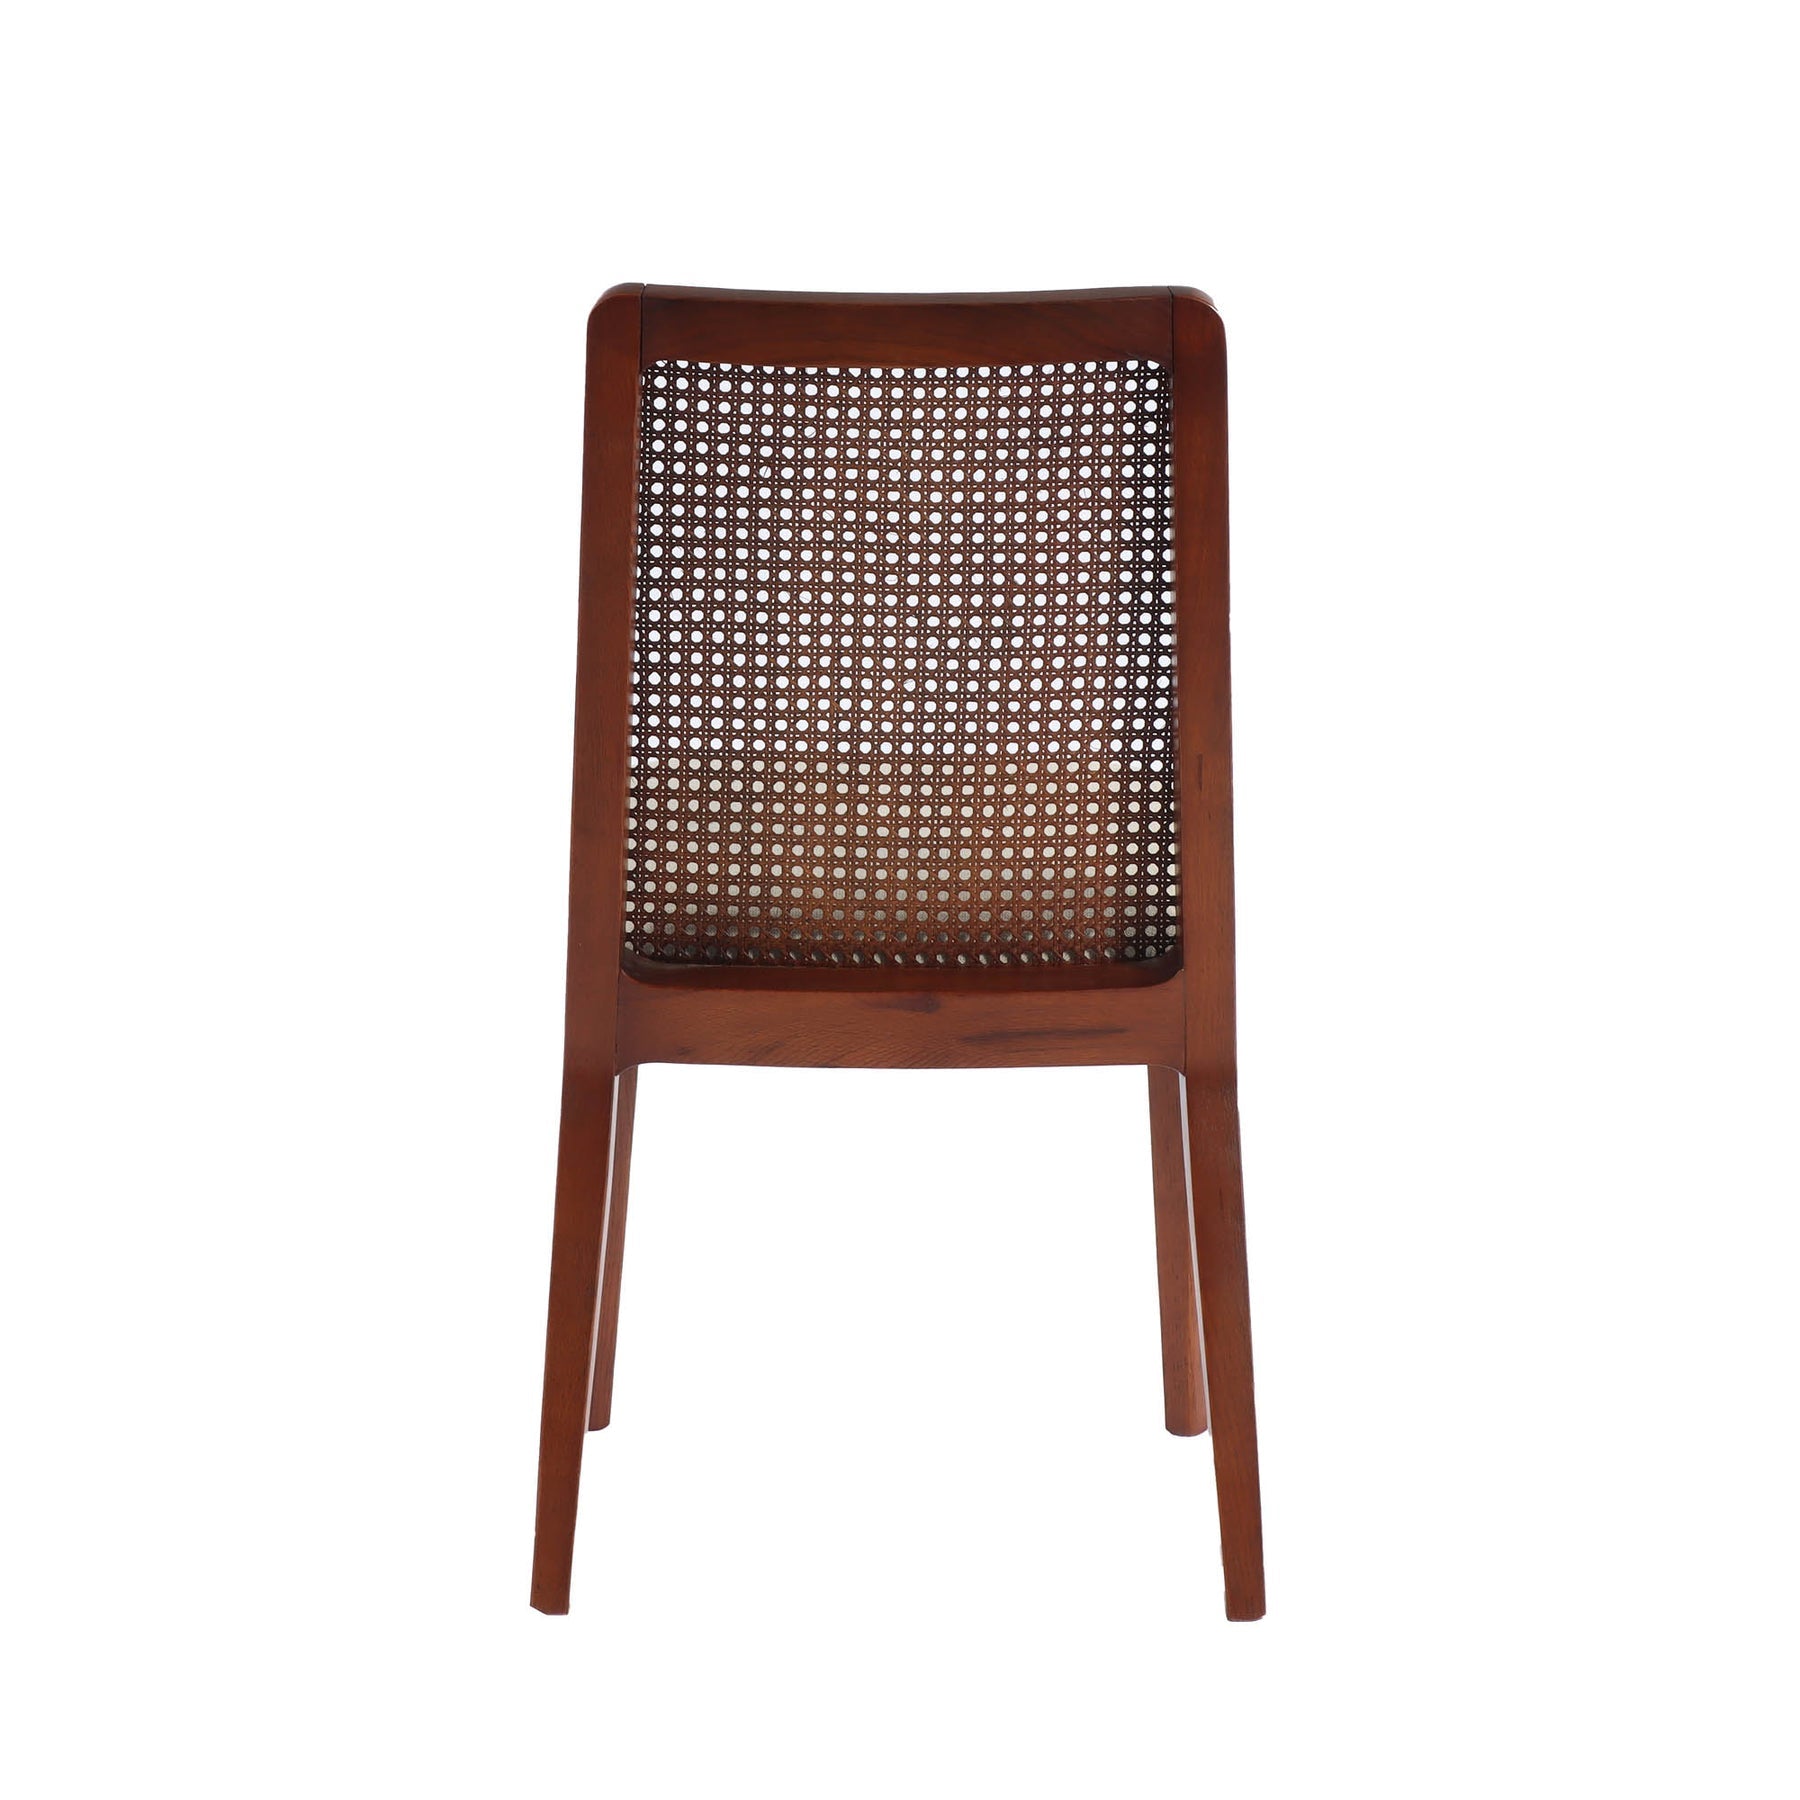 Cane Dining Chair- Oyster Linen with Brown Legs